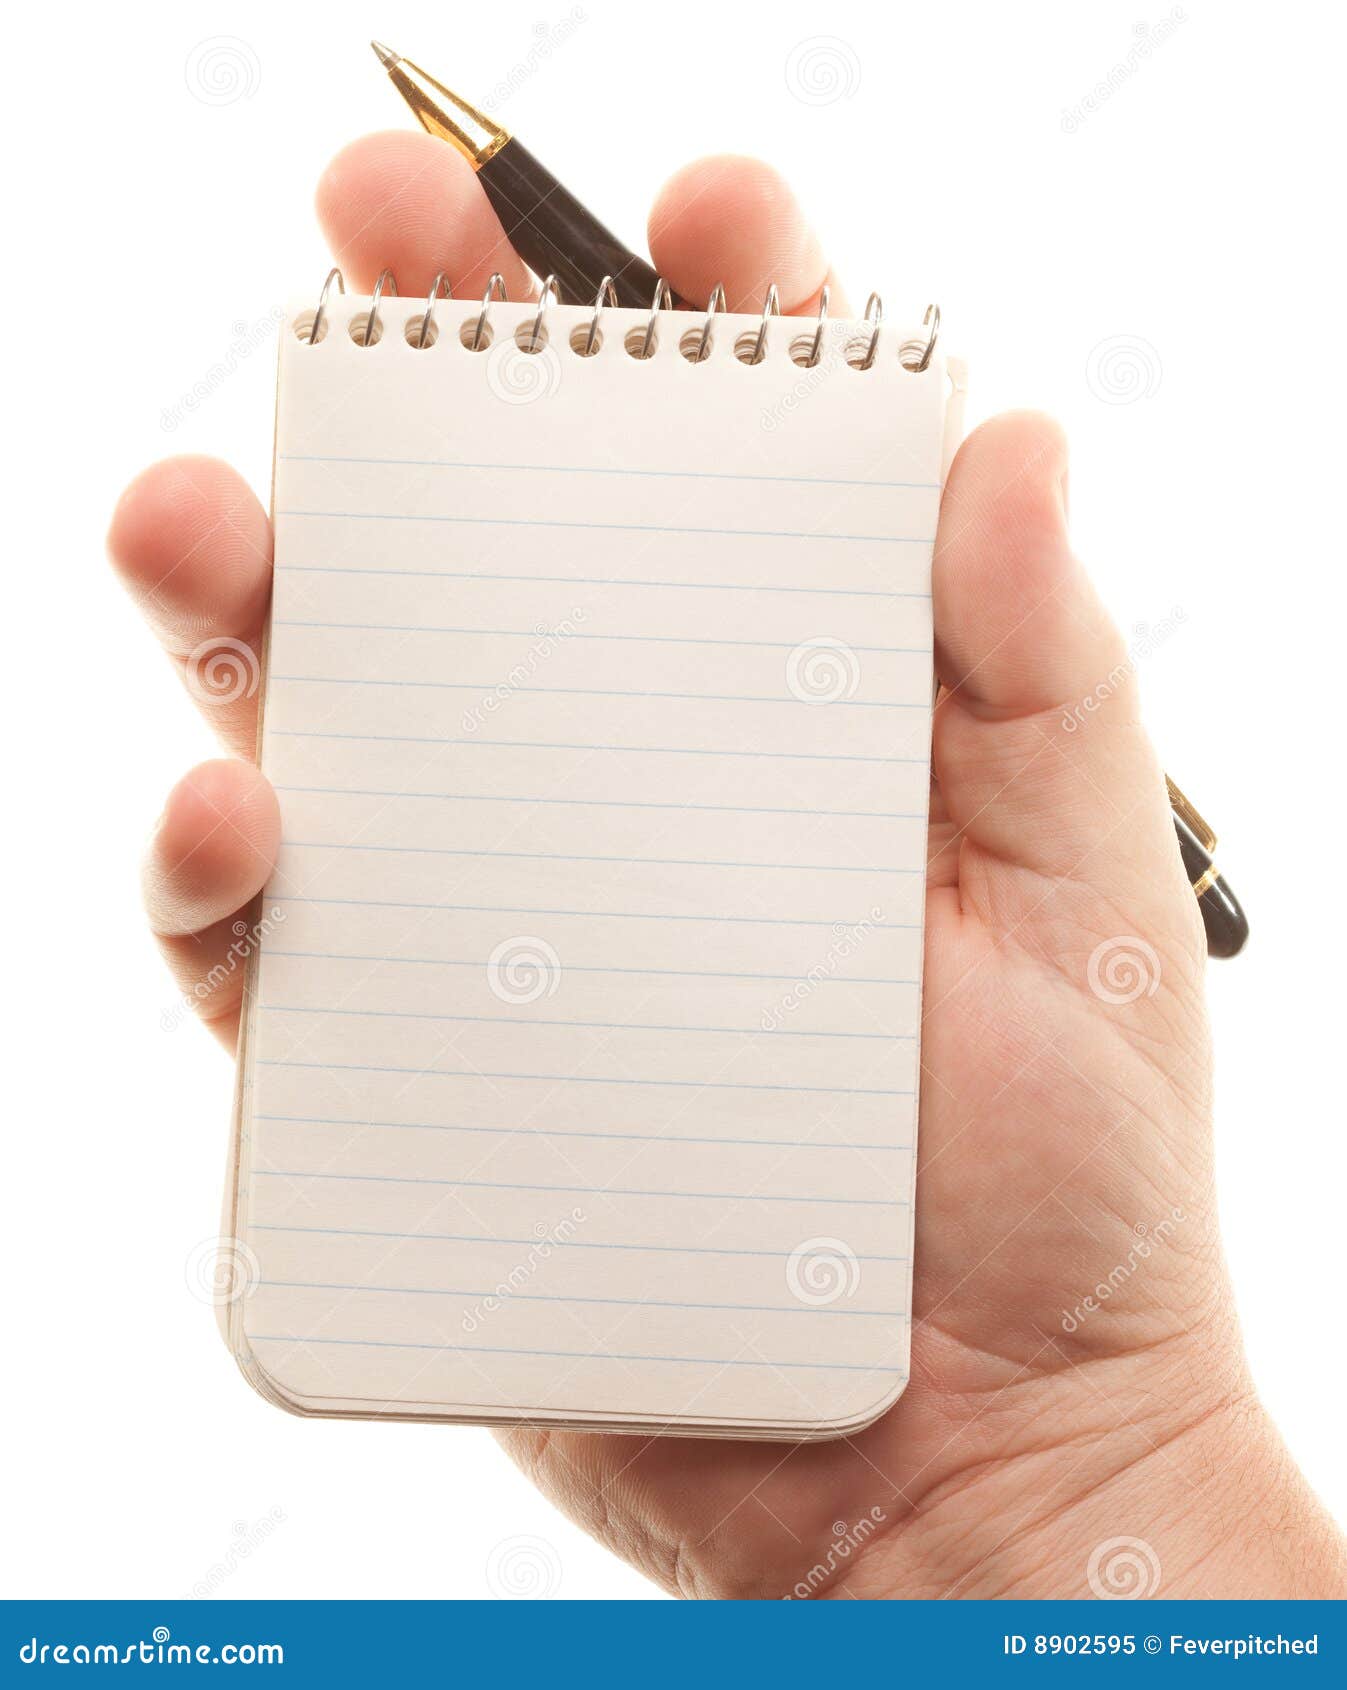 male hands holding pen and pad of paper